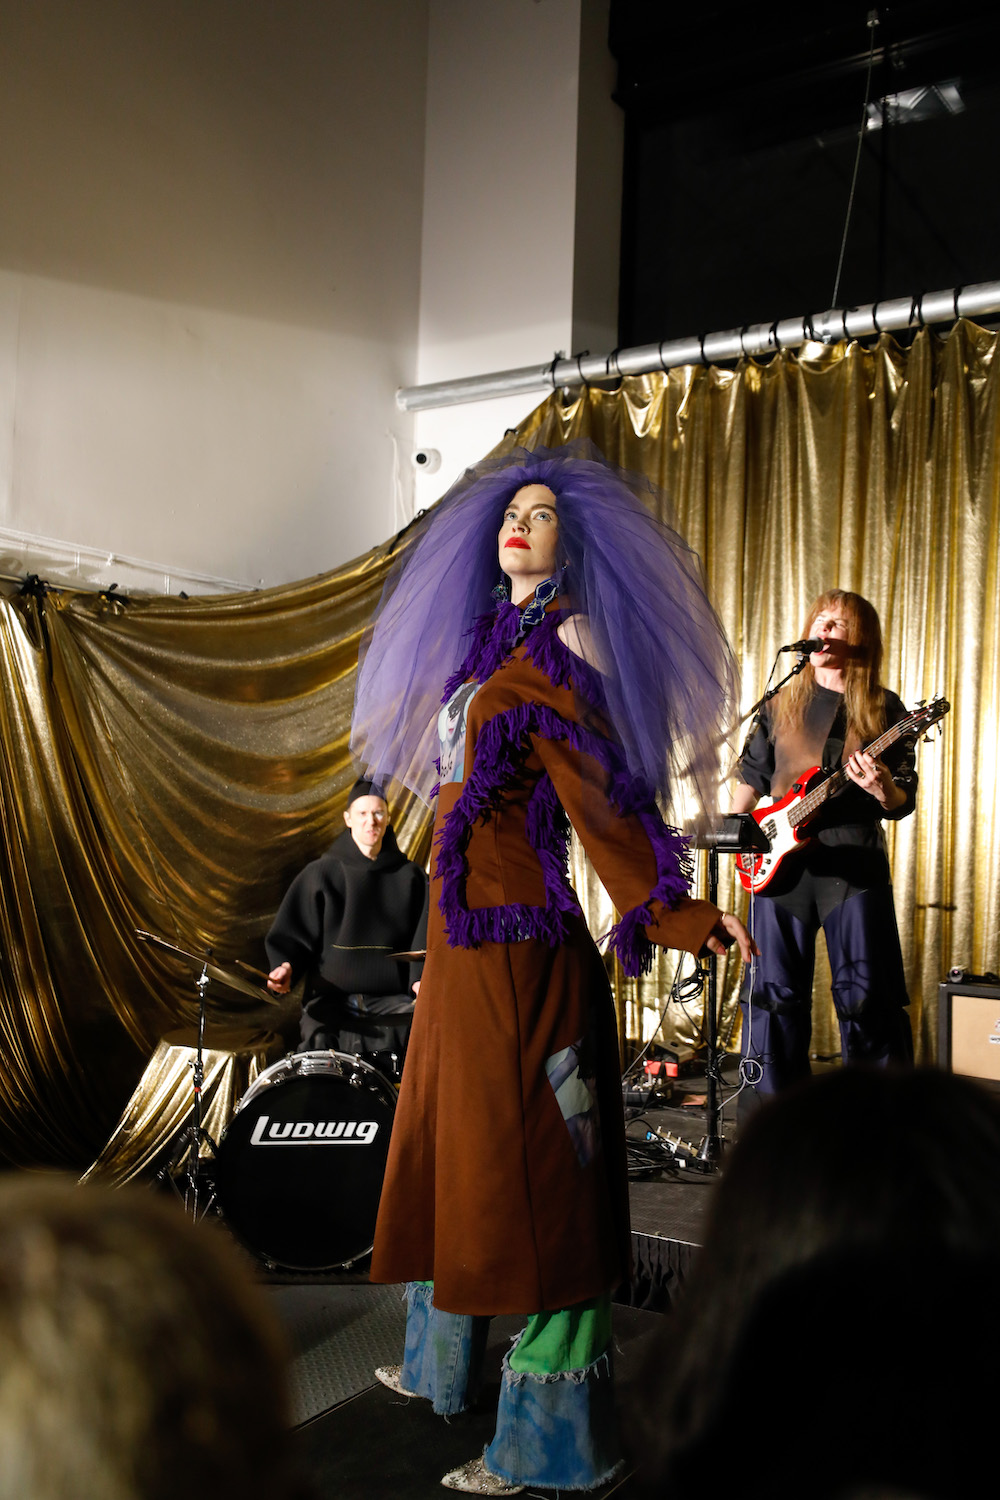 Model dressed in a purple tulle hat, brown coat with purple ruffles, and patchwork jeans designed by Paradoxvestedrelics, Yxen, and Kids Destroy.